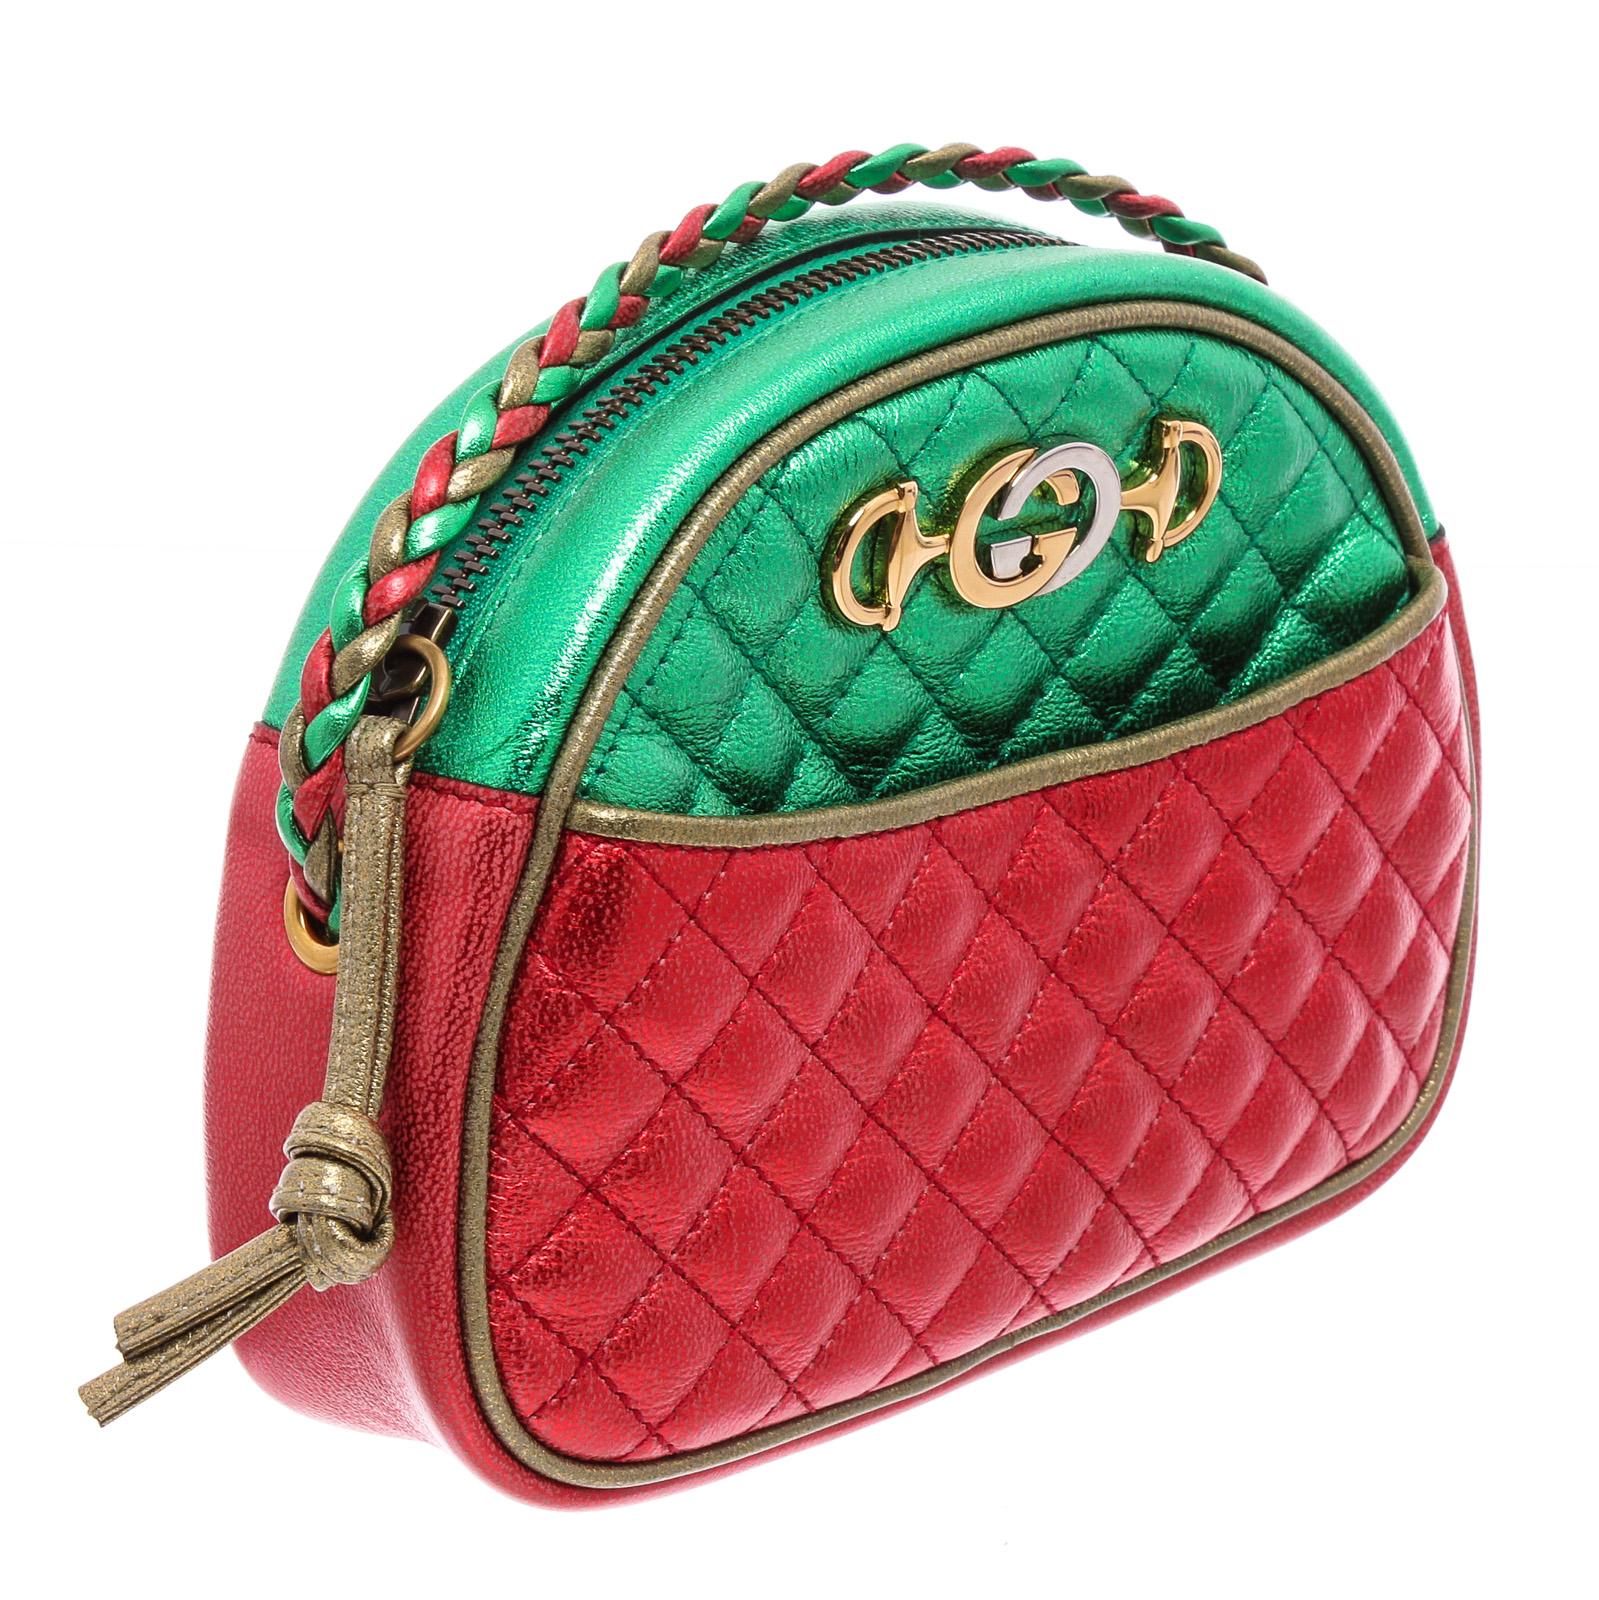 Gucci Mini Trapuntata crossbody bag crafted of textured calfskin leather in a laminated red and green. The shoulder bag features a waist length braided shoulder strap and has combined its horse bit and interlocked G insignias in gold and silver tone